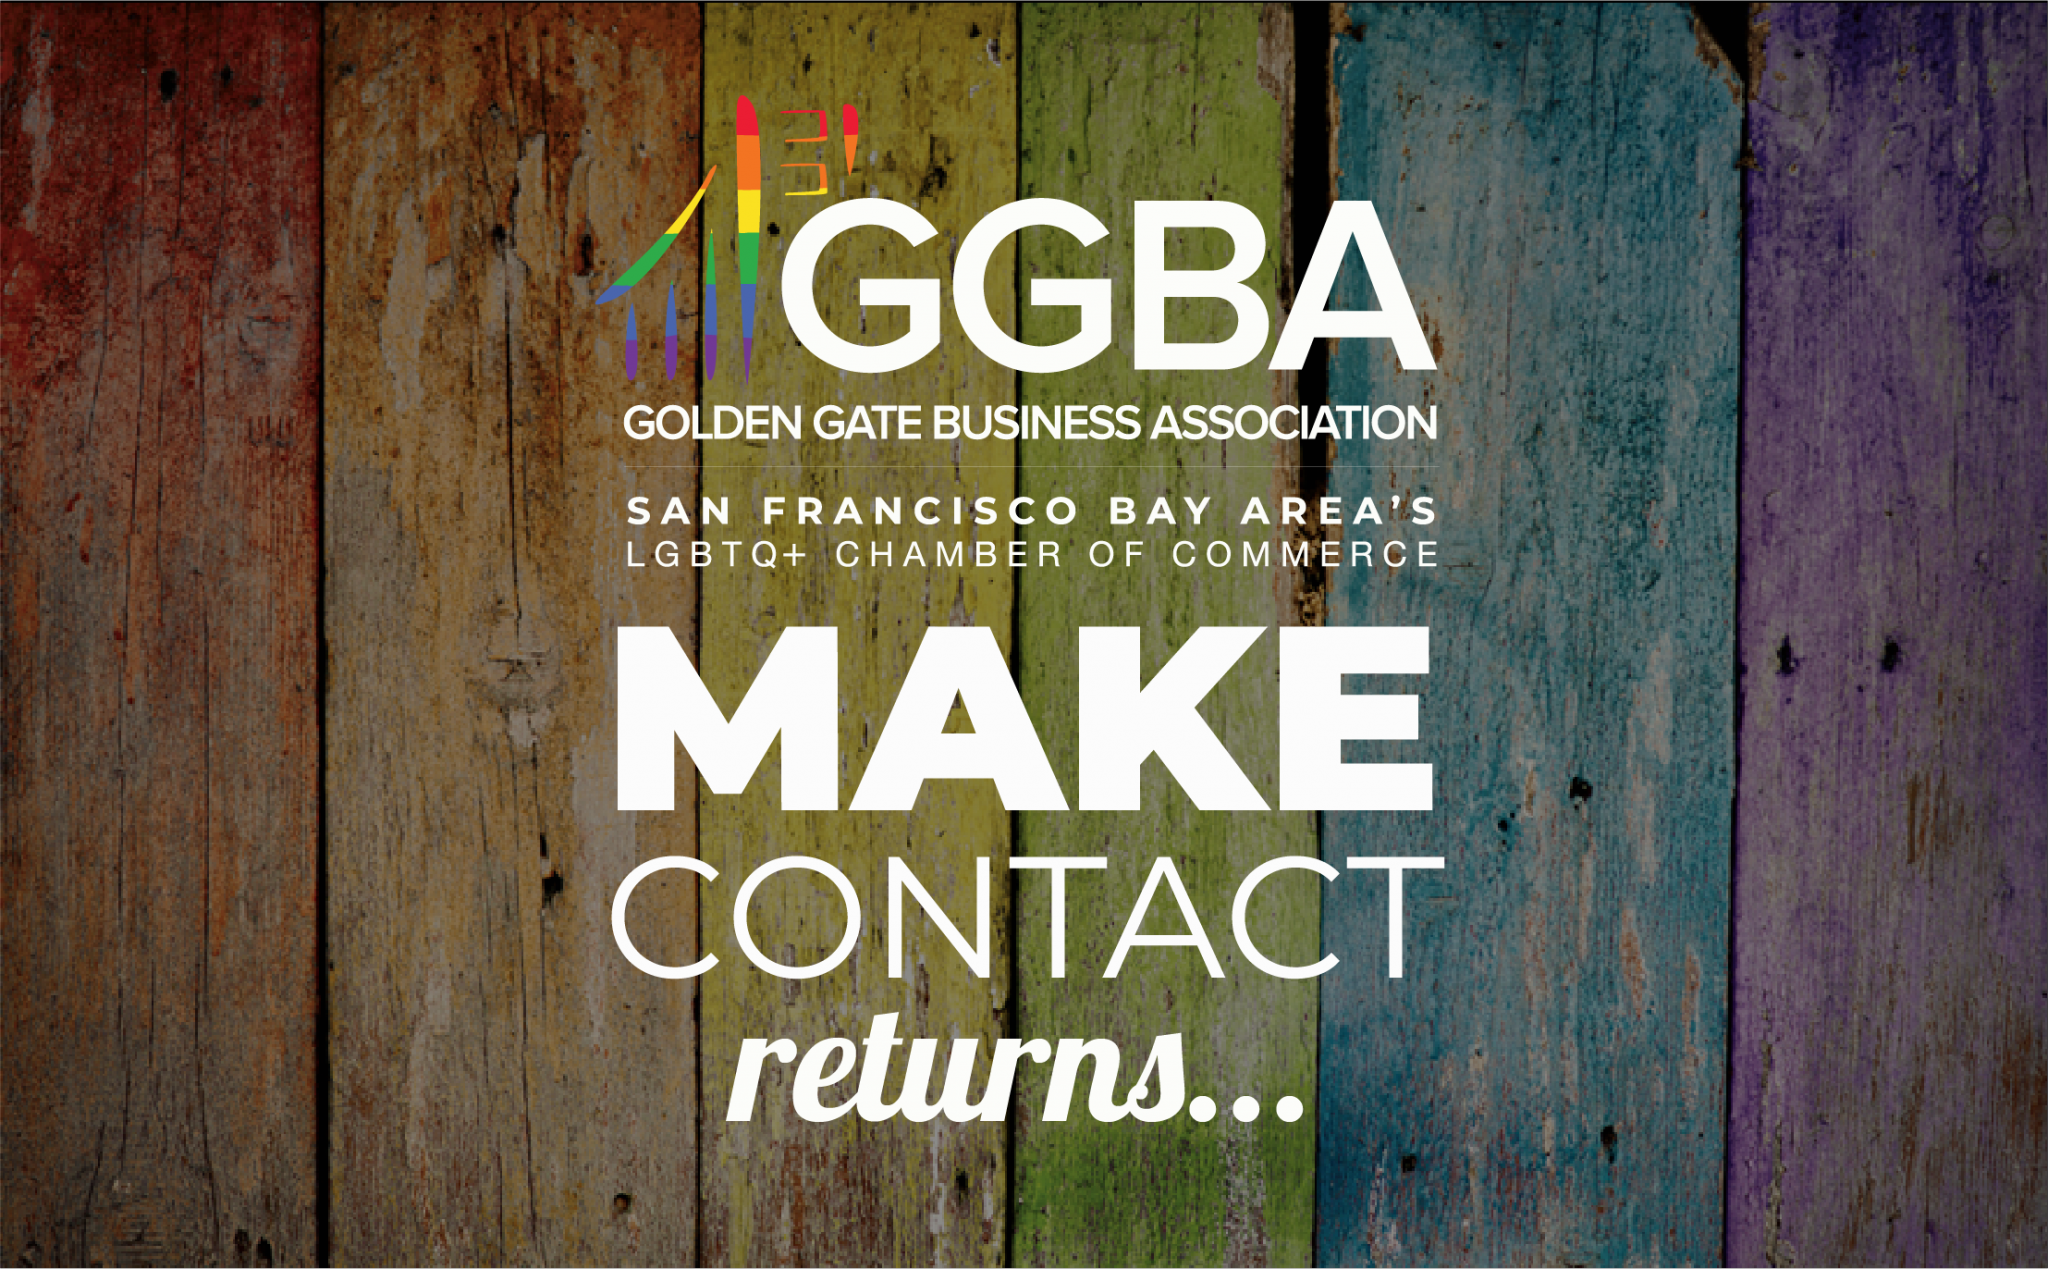 You are currently viewing GGBA’S ‘MAKE CONTACT’ RETURNS